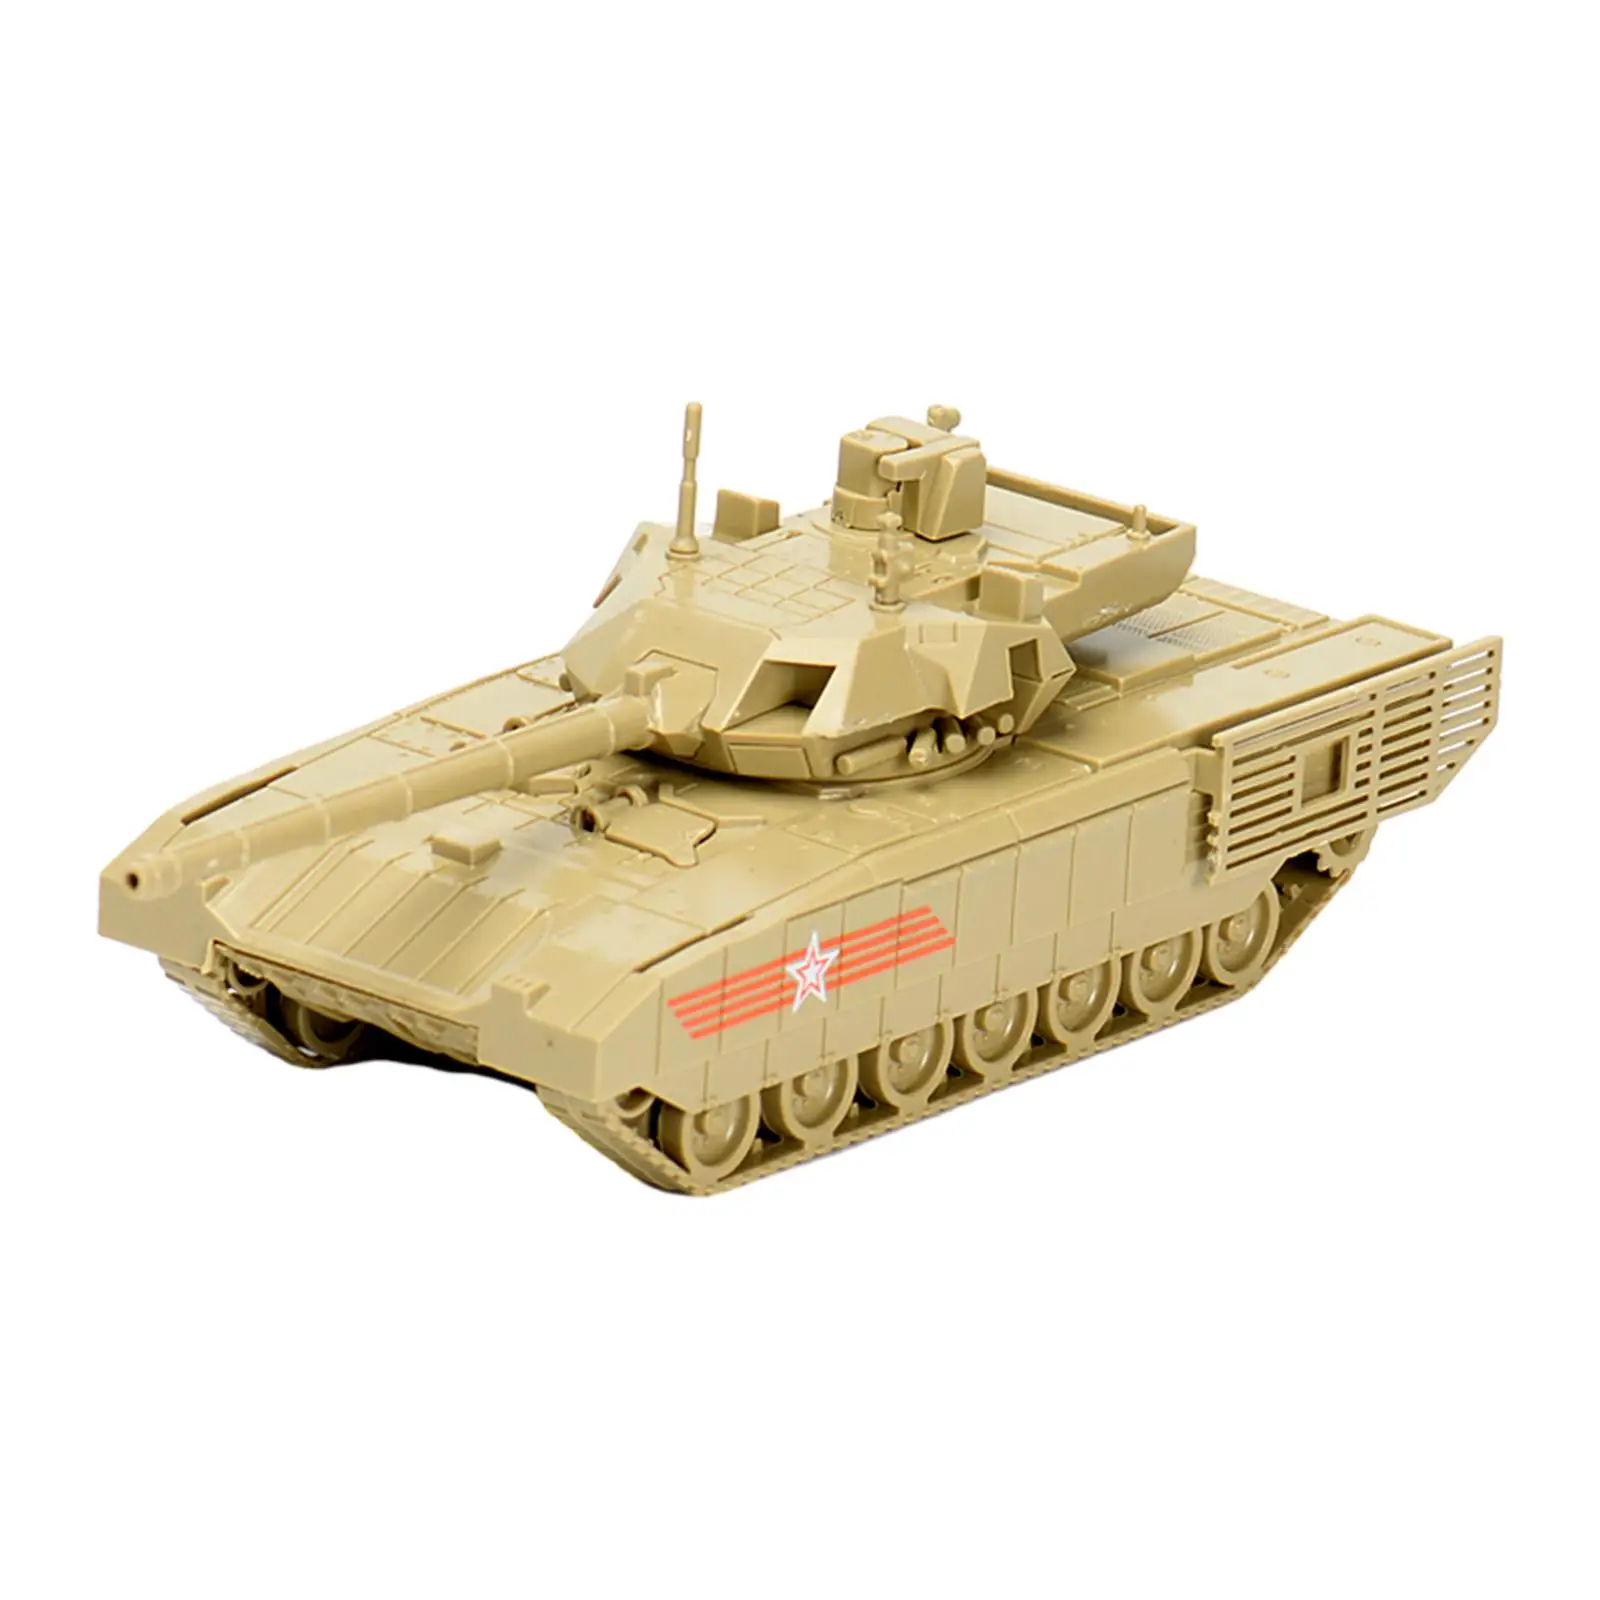 1:72 Scale Reconnaissance Vehicles Miniature Armored Tank Model for Keepsake Table Scene Adults Party Favors Collectibles